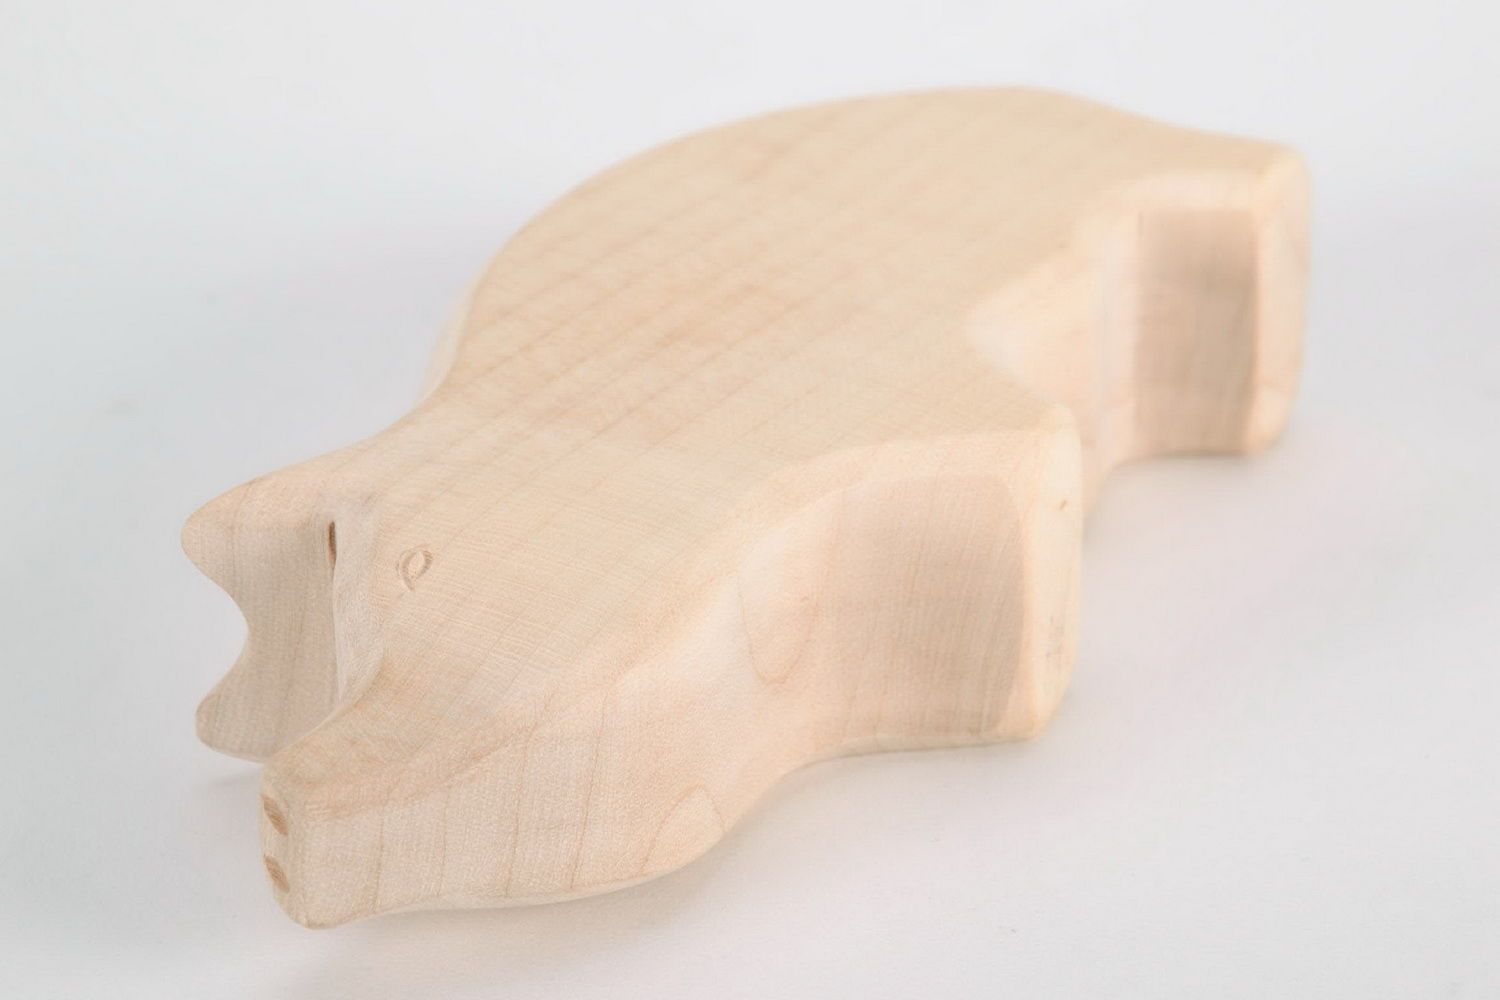 Figurine made from maple wood Pig photo 4